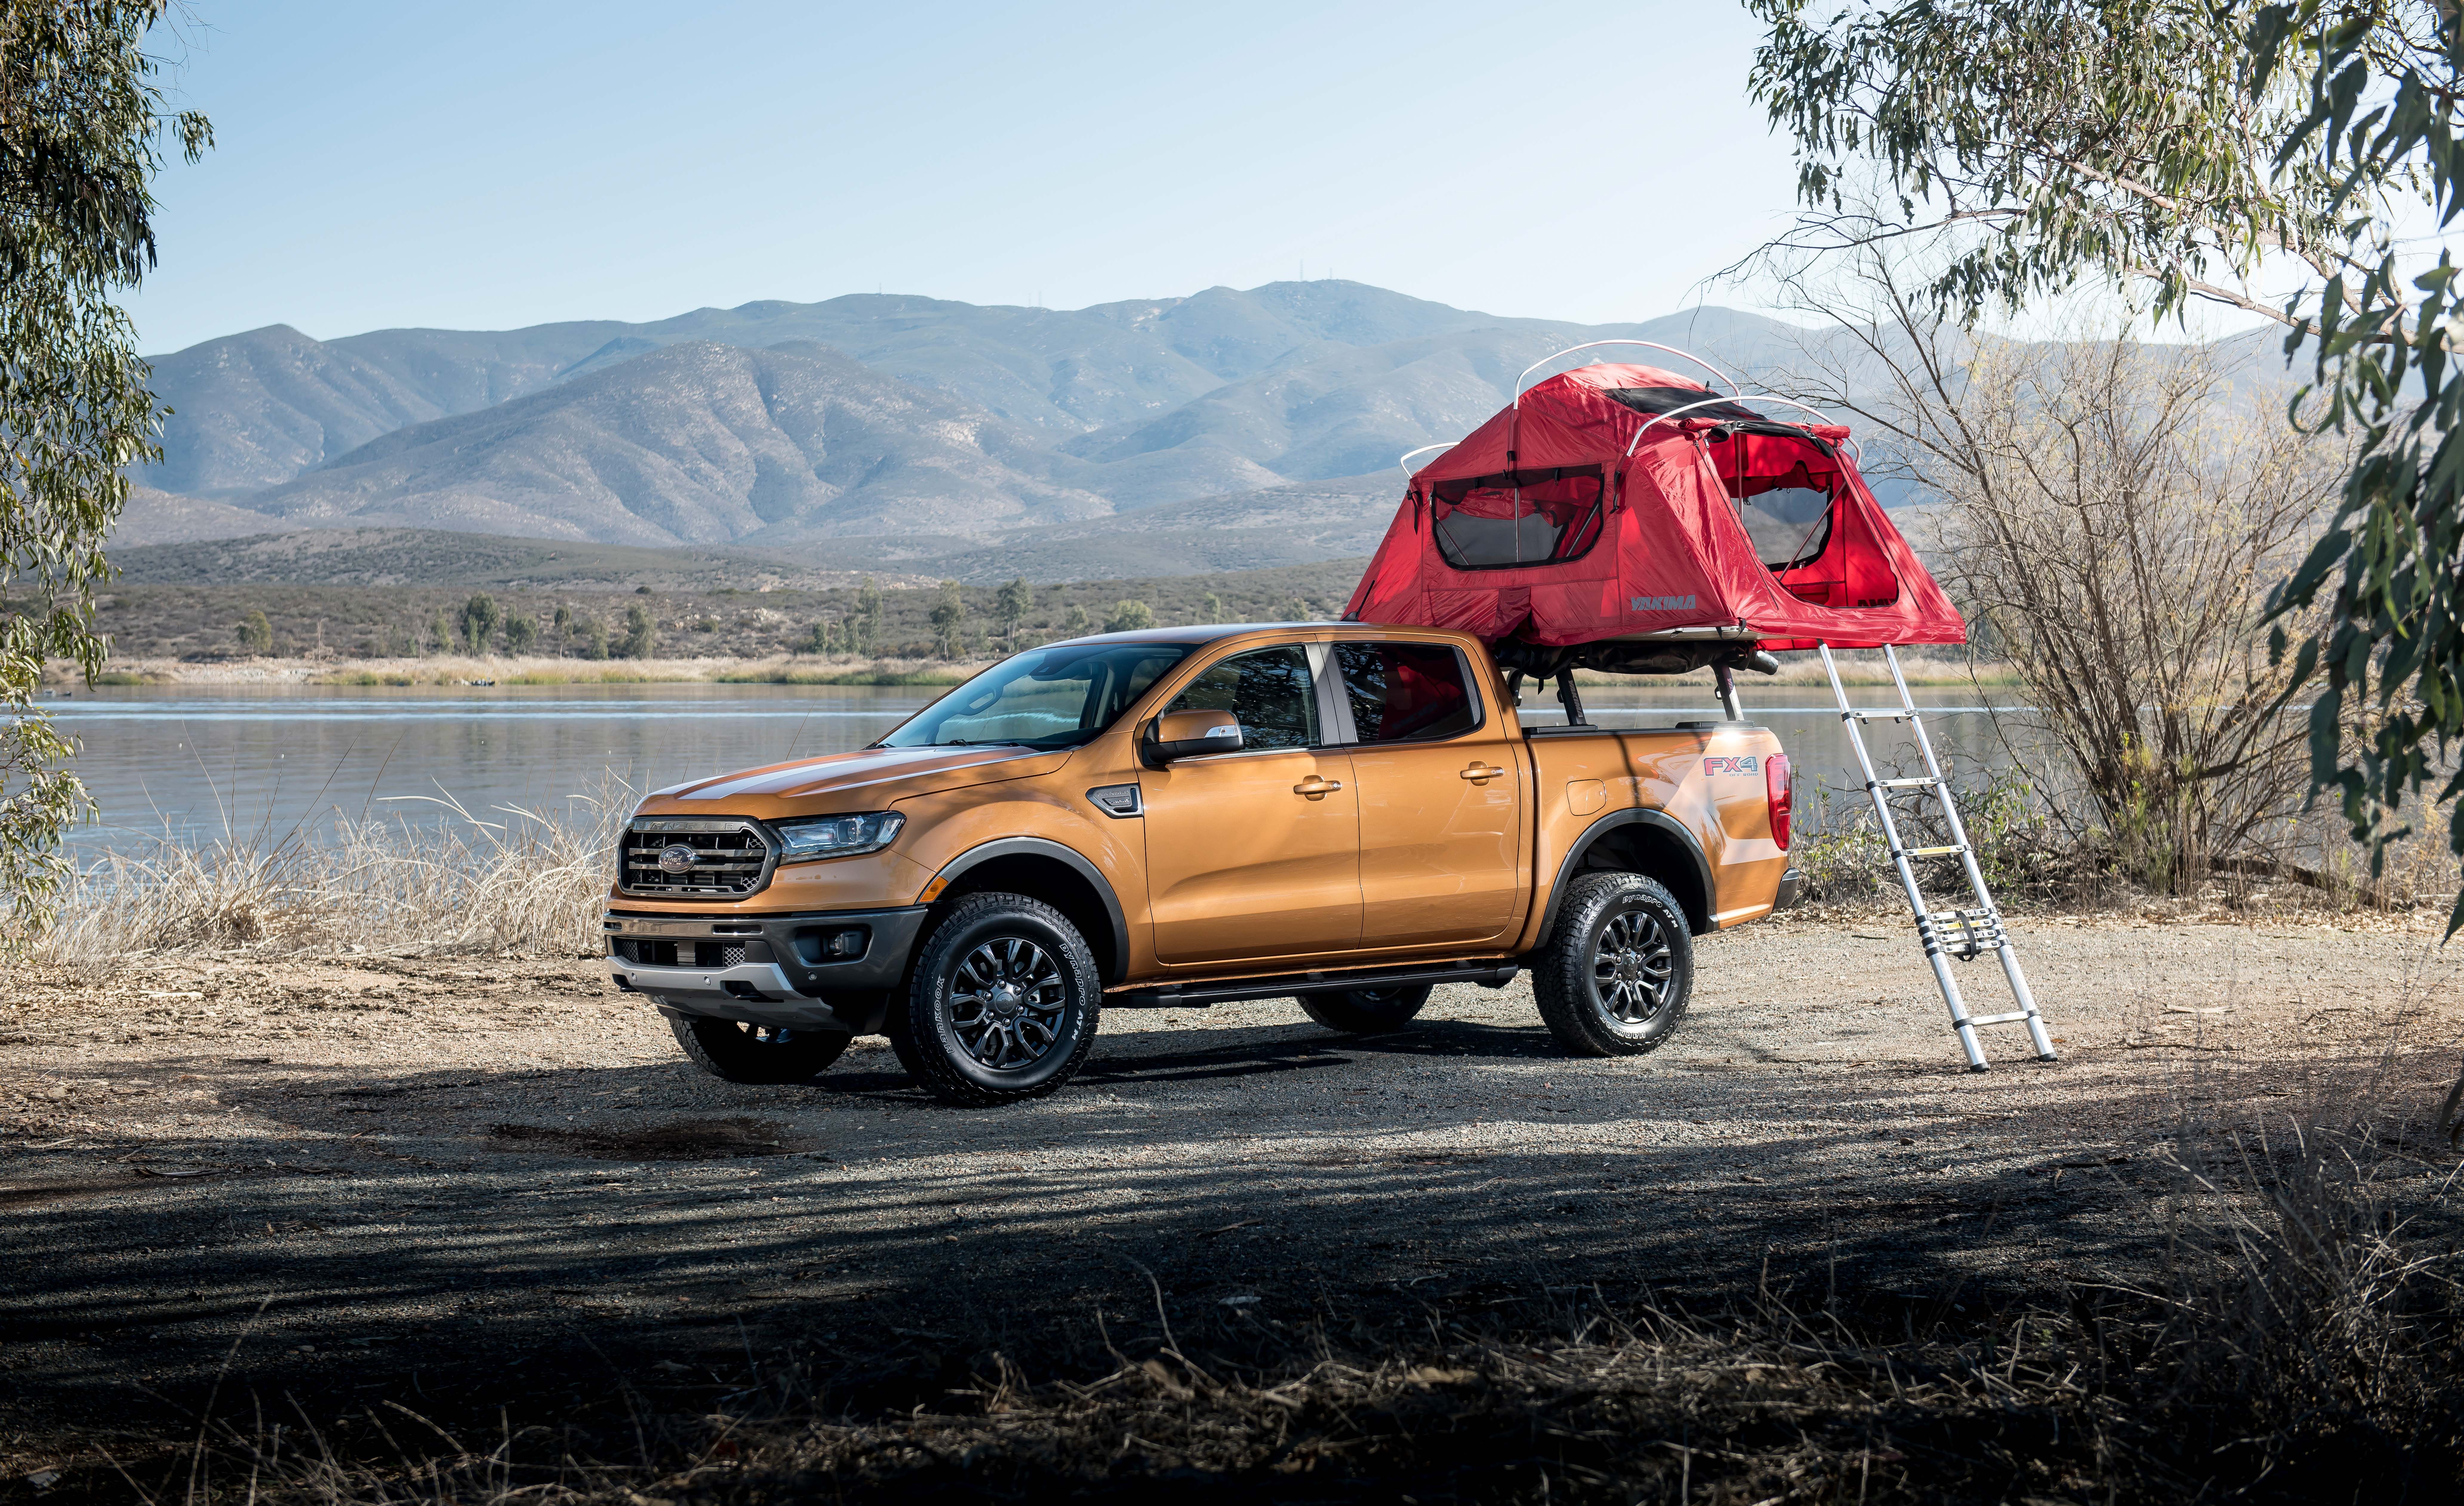 2019 Ford Ranger Midsize Pickup Review Whats New Again Is